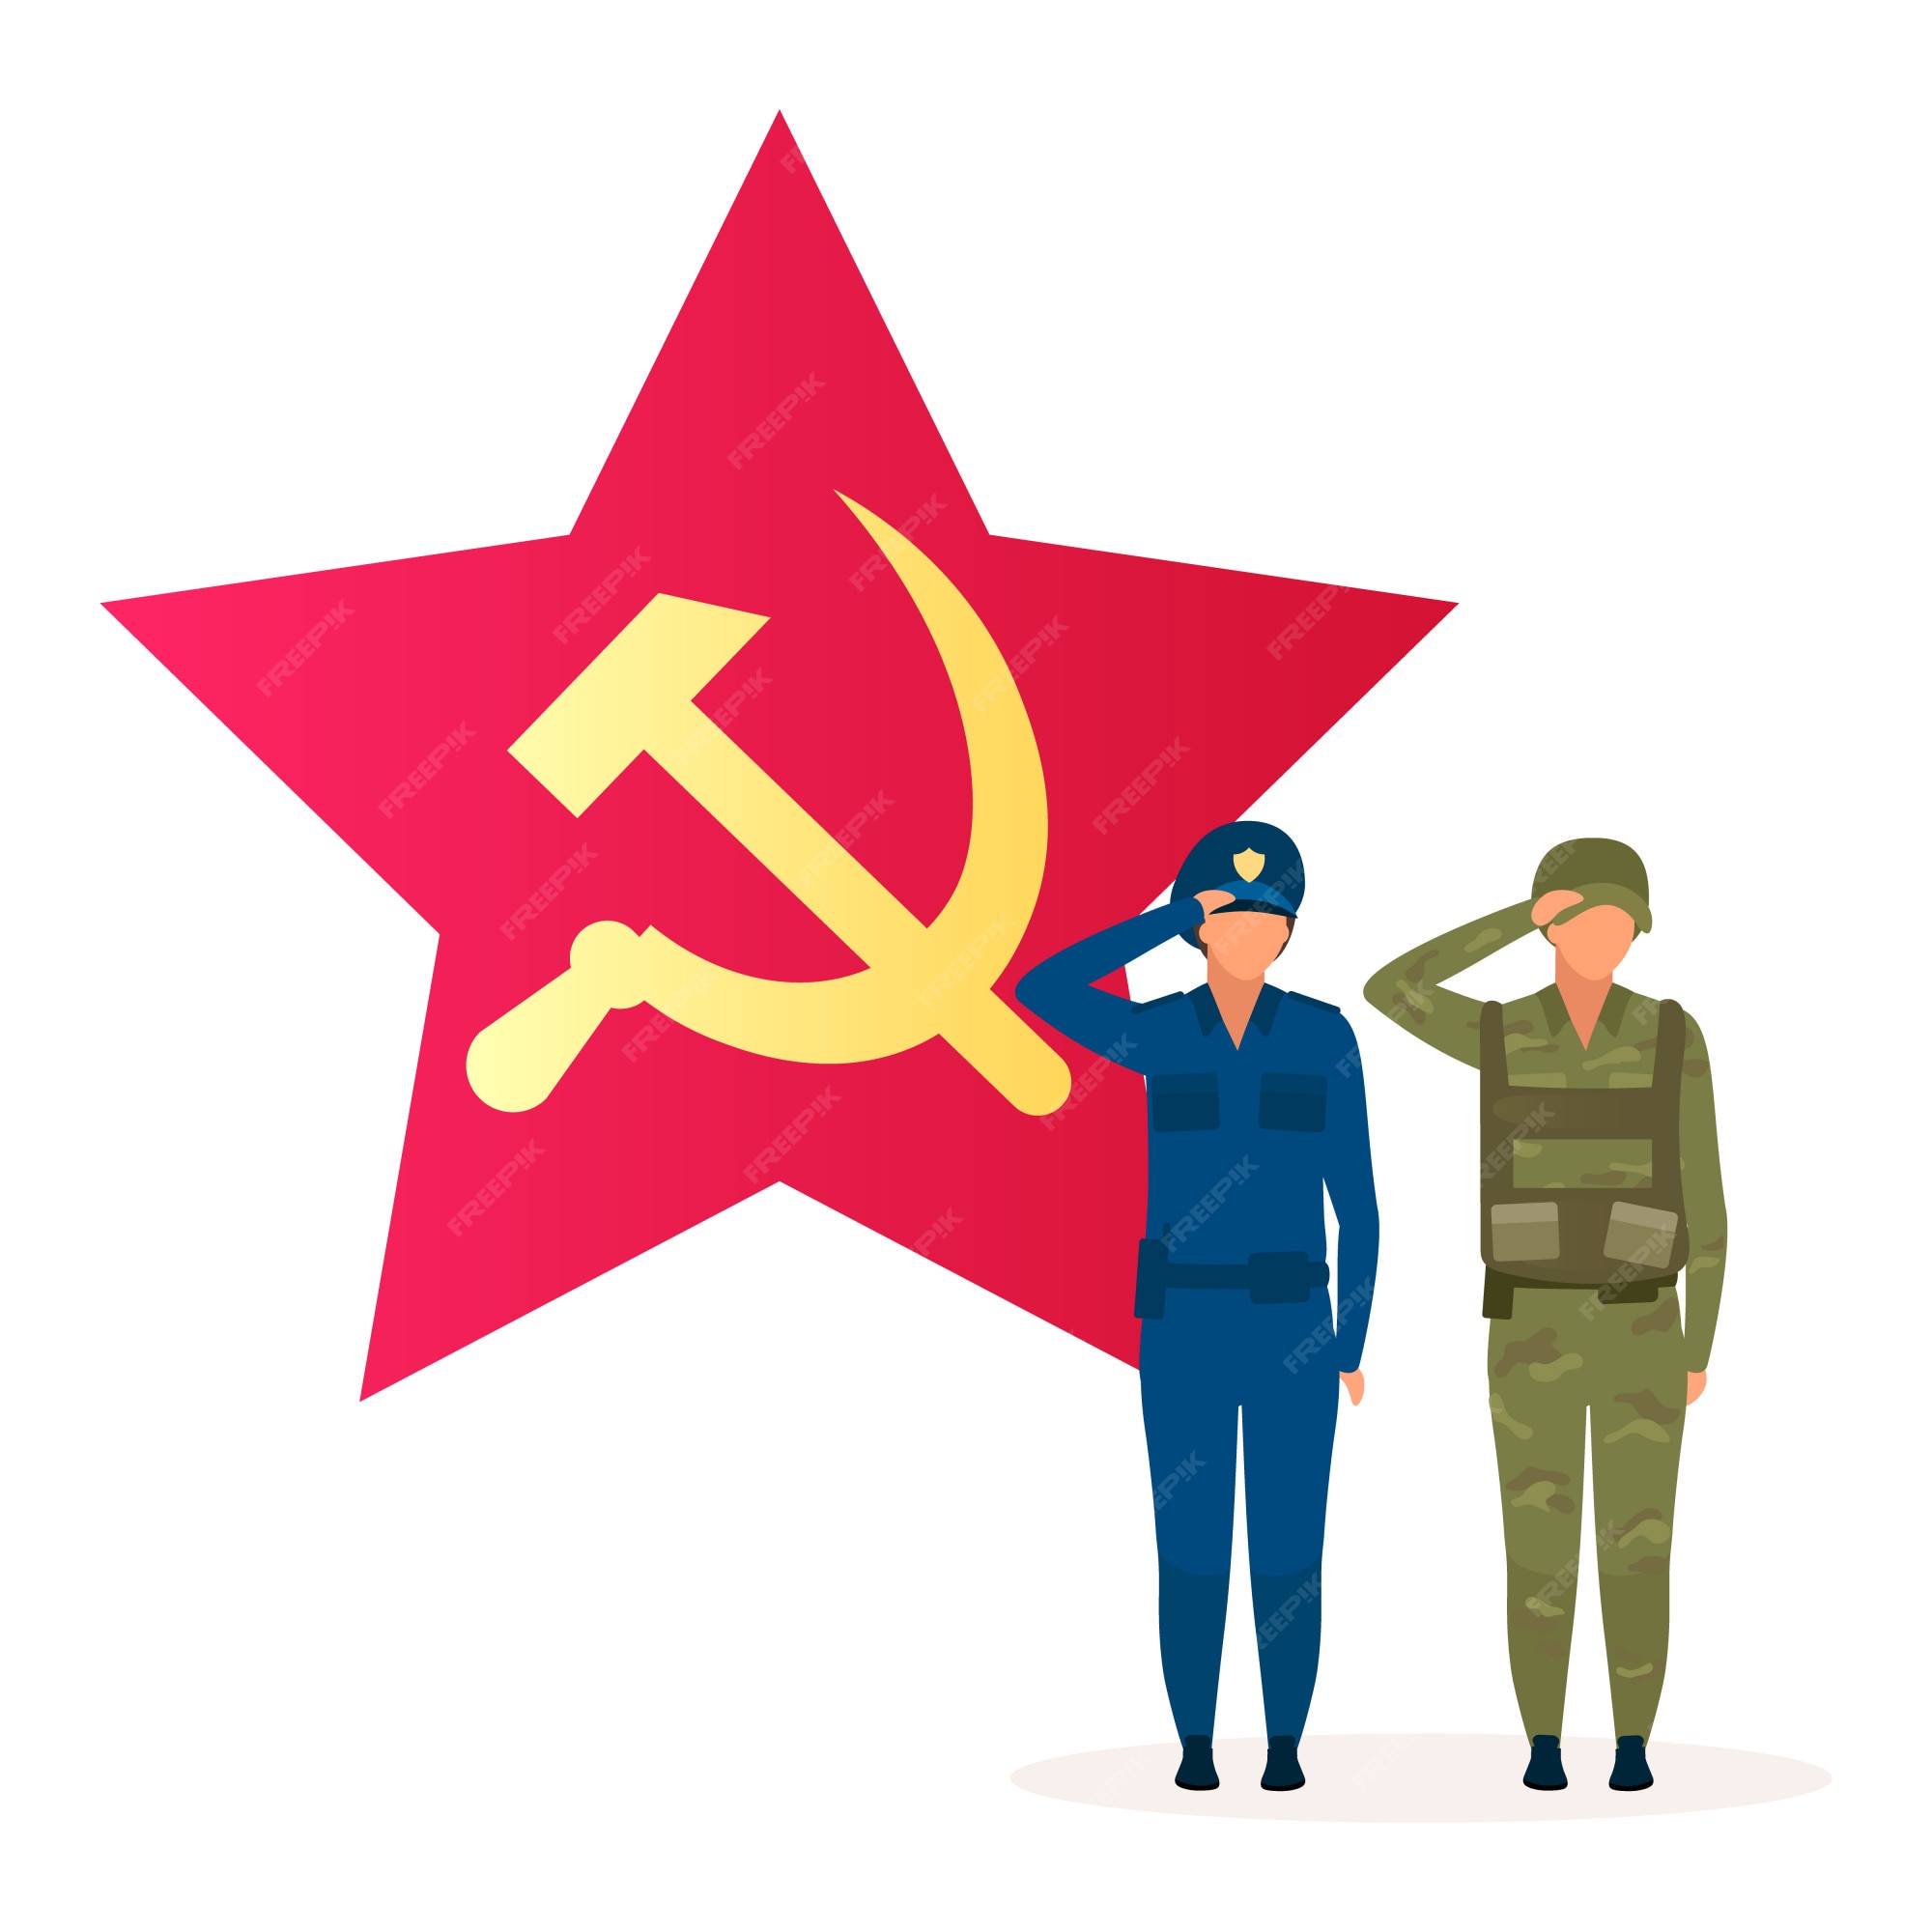 Premium Vector | Communism political system metaphor flat illustration.  marxism ideology. soviet union system. common ownership and absence of  classes. form of government. socialist cartoon characters